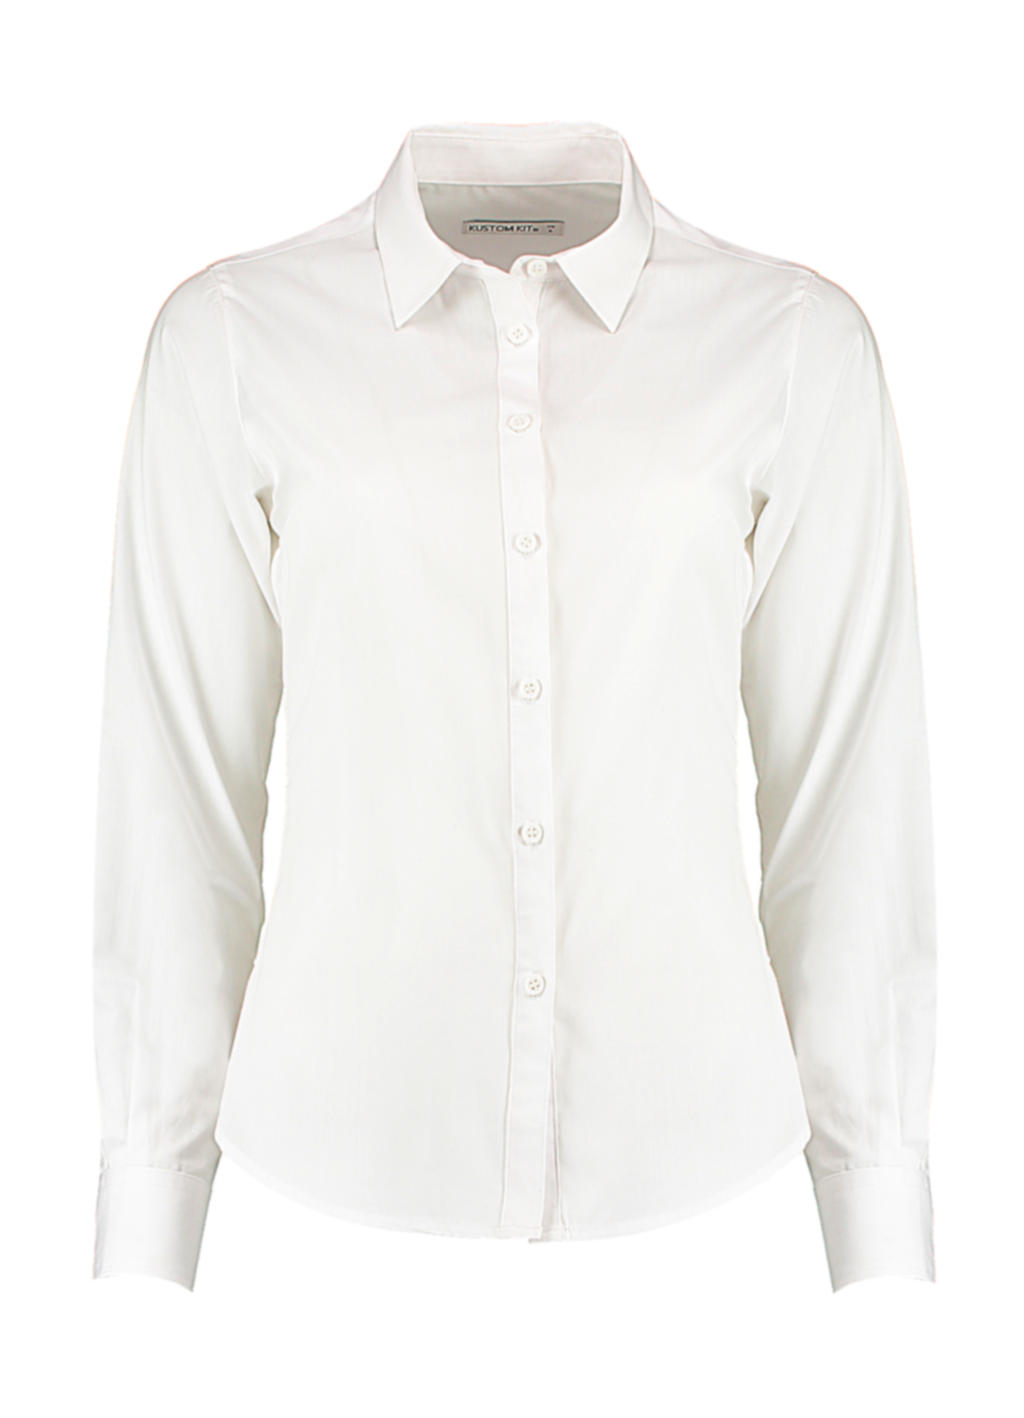  Womens Tailored Fit Poplin Shirt in Farbe White